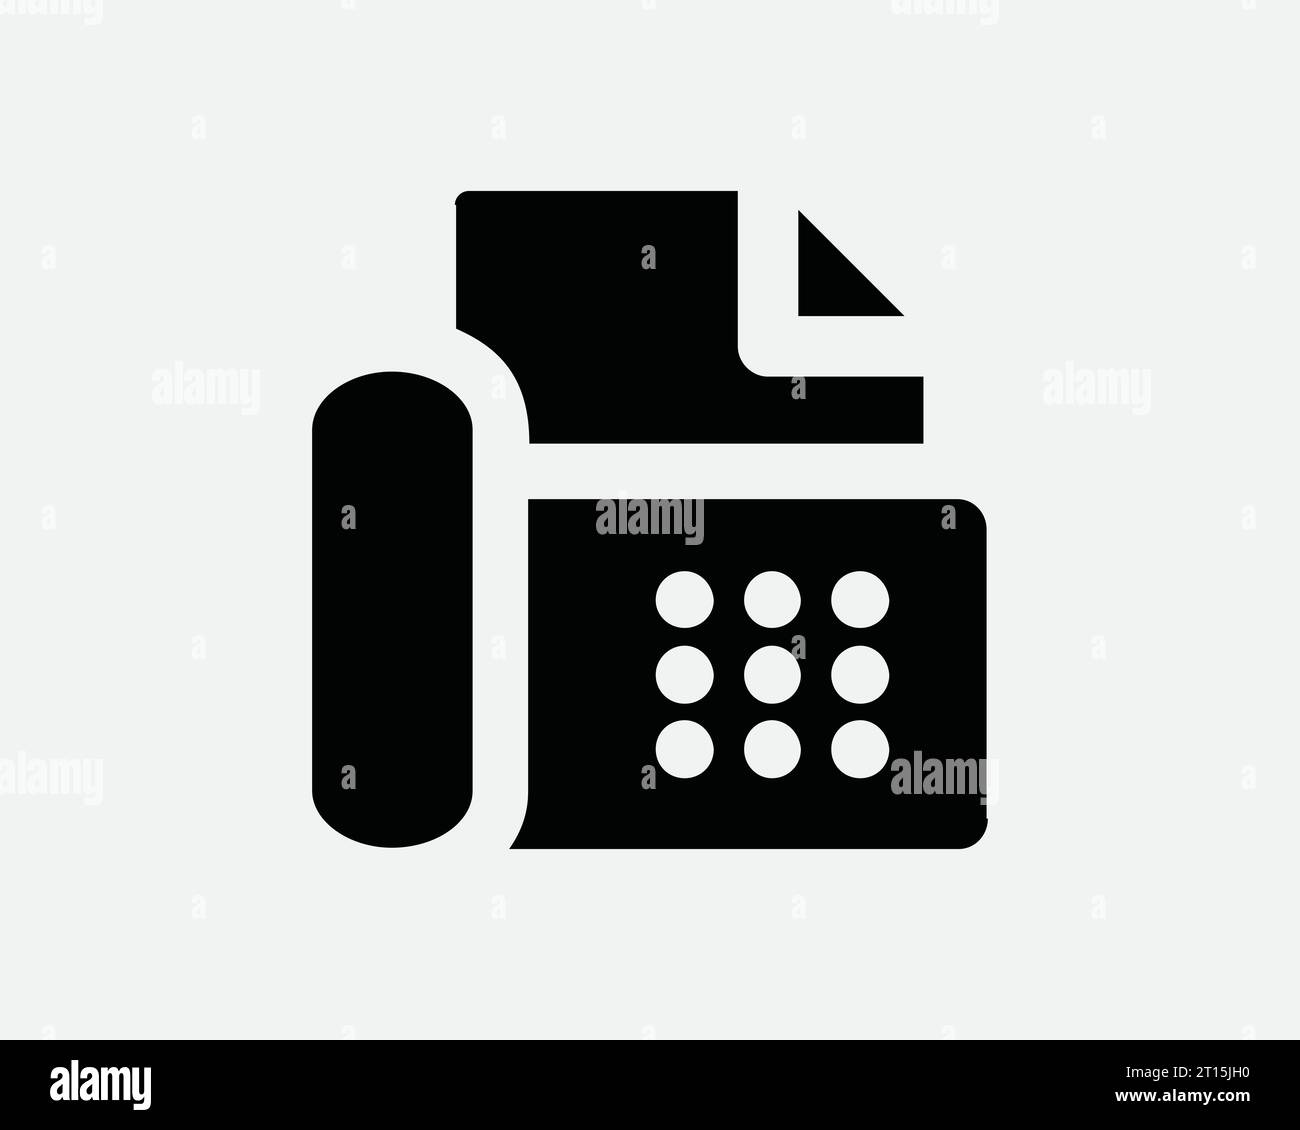 Fax Machine Icon Office Equipment Print Printer Device Phone Business Telephone Technology Tech Black White Line Outline Shape Sign Symbol EPS Vector Stock Vector